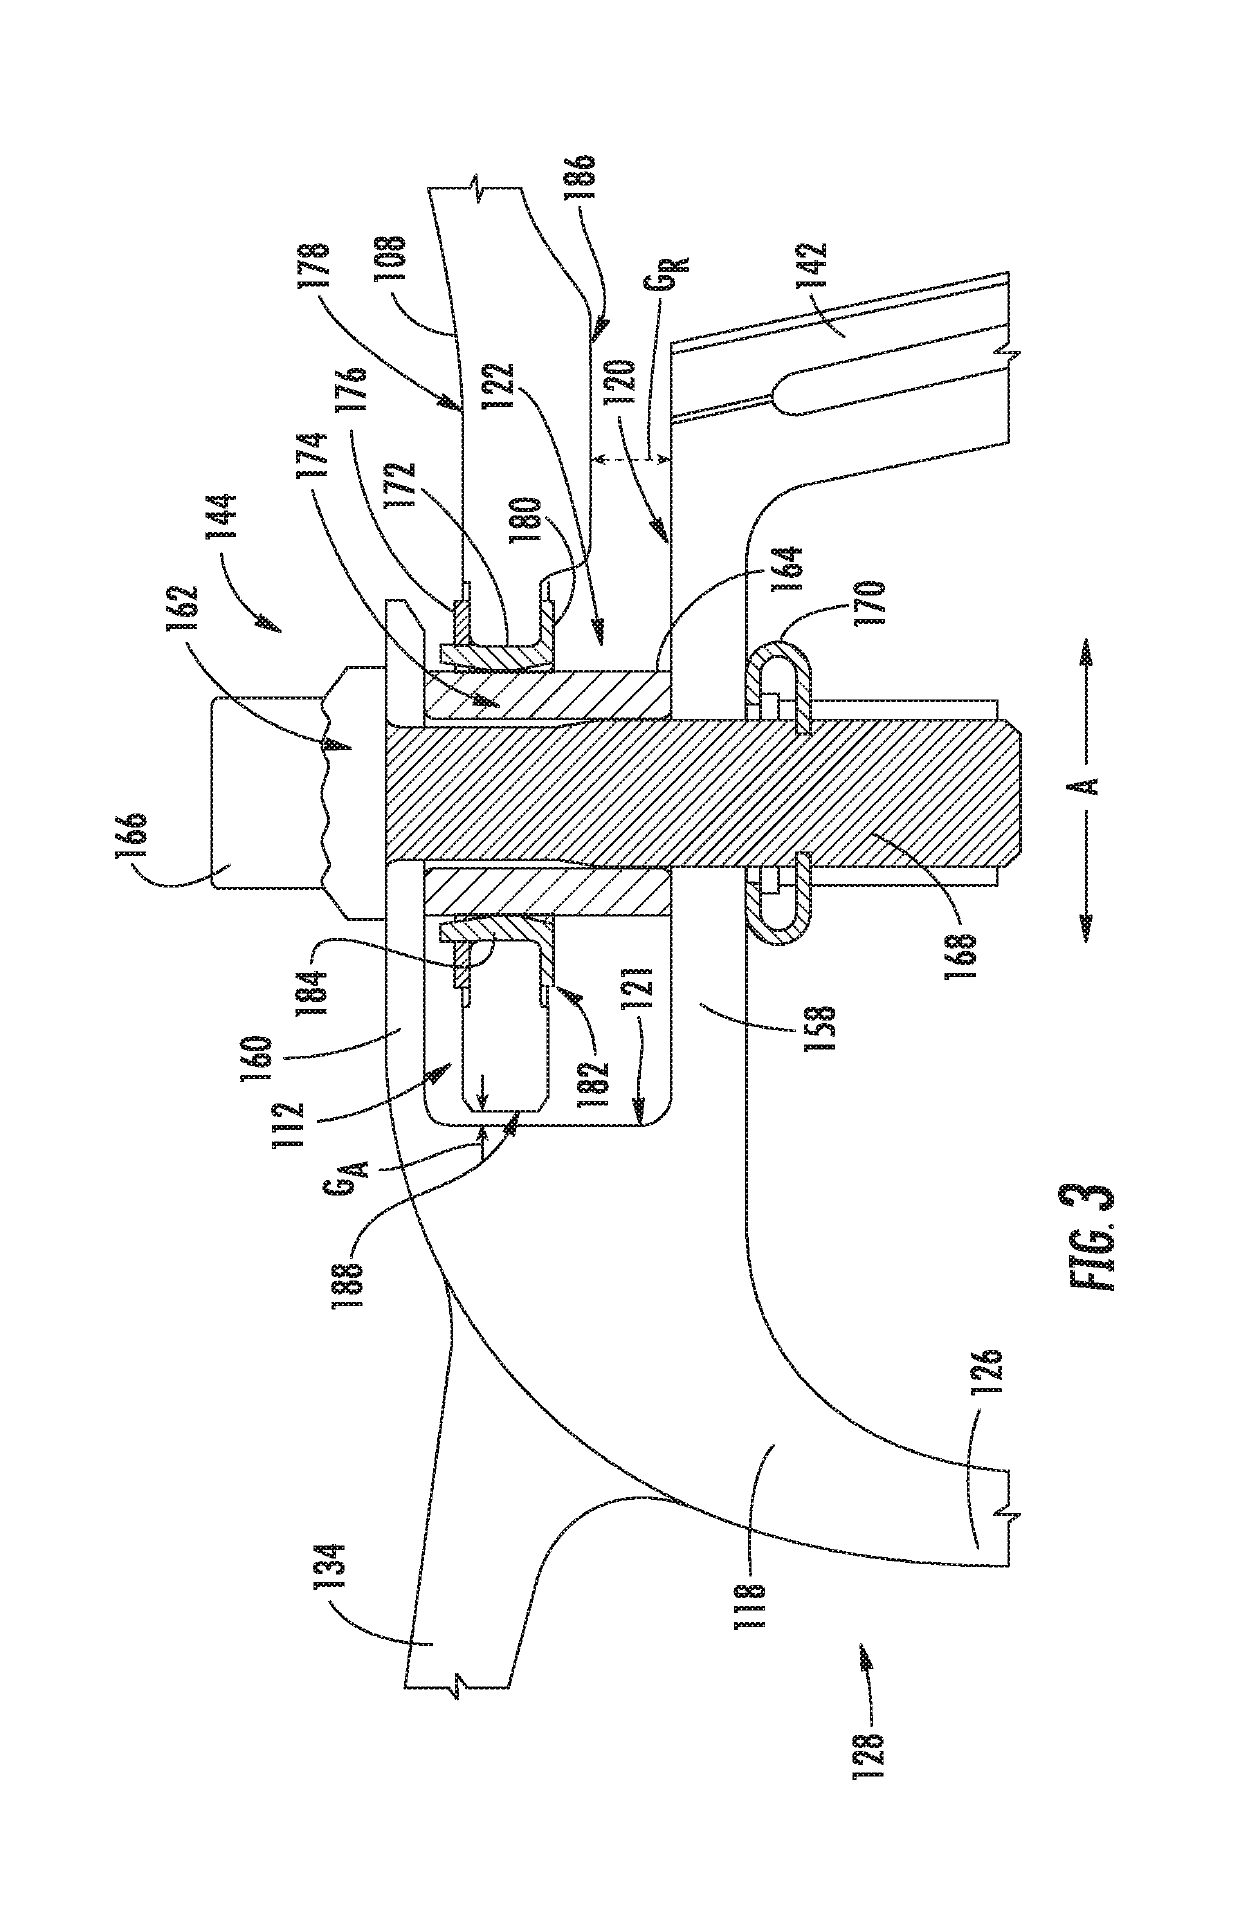 Combustor Assembly for a Turbine Engine